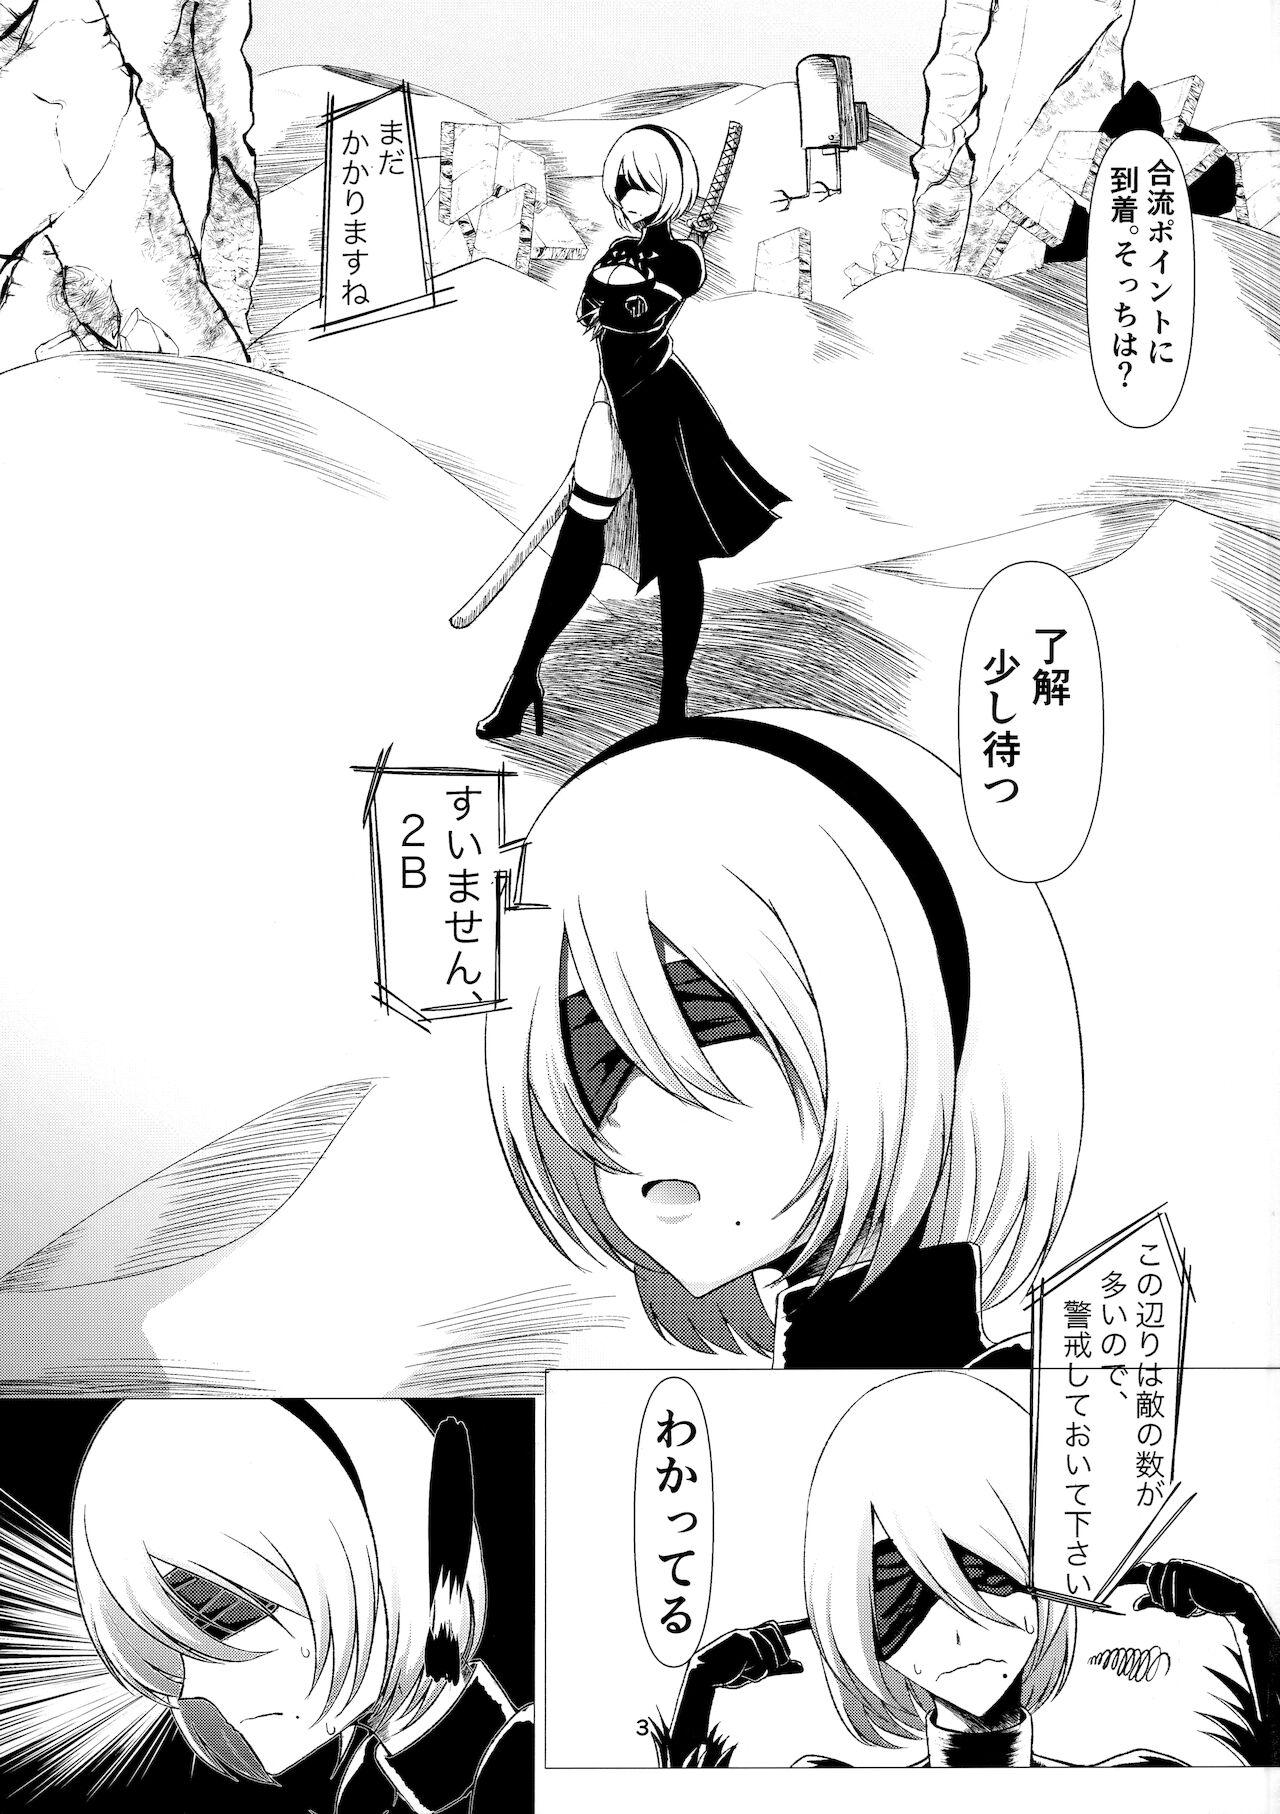 Male E690BEE4B9B3E88289E5A5B4E99AB7 2B - Nier automata Creampie - Page 2